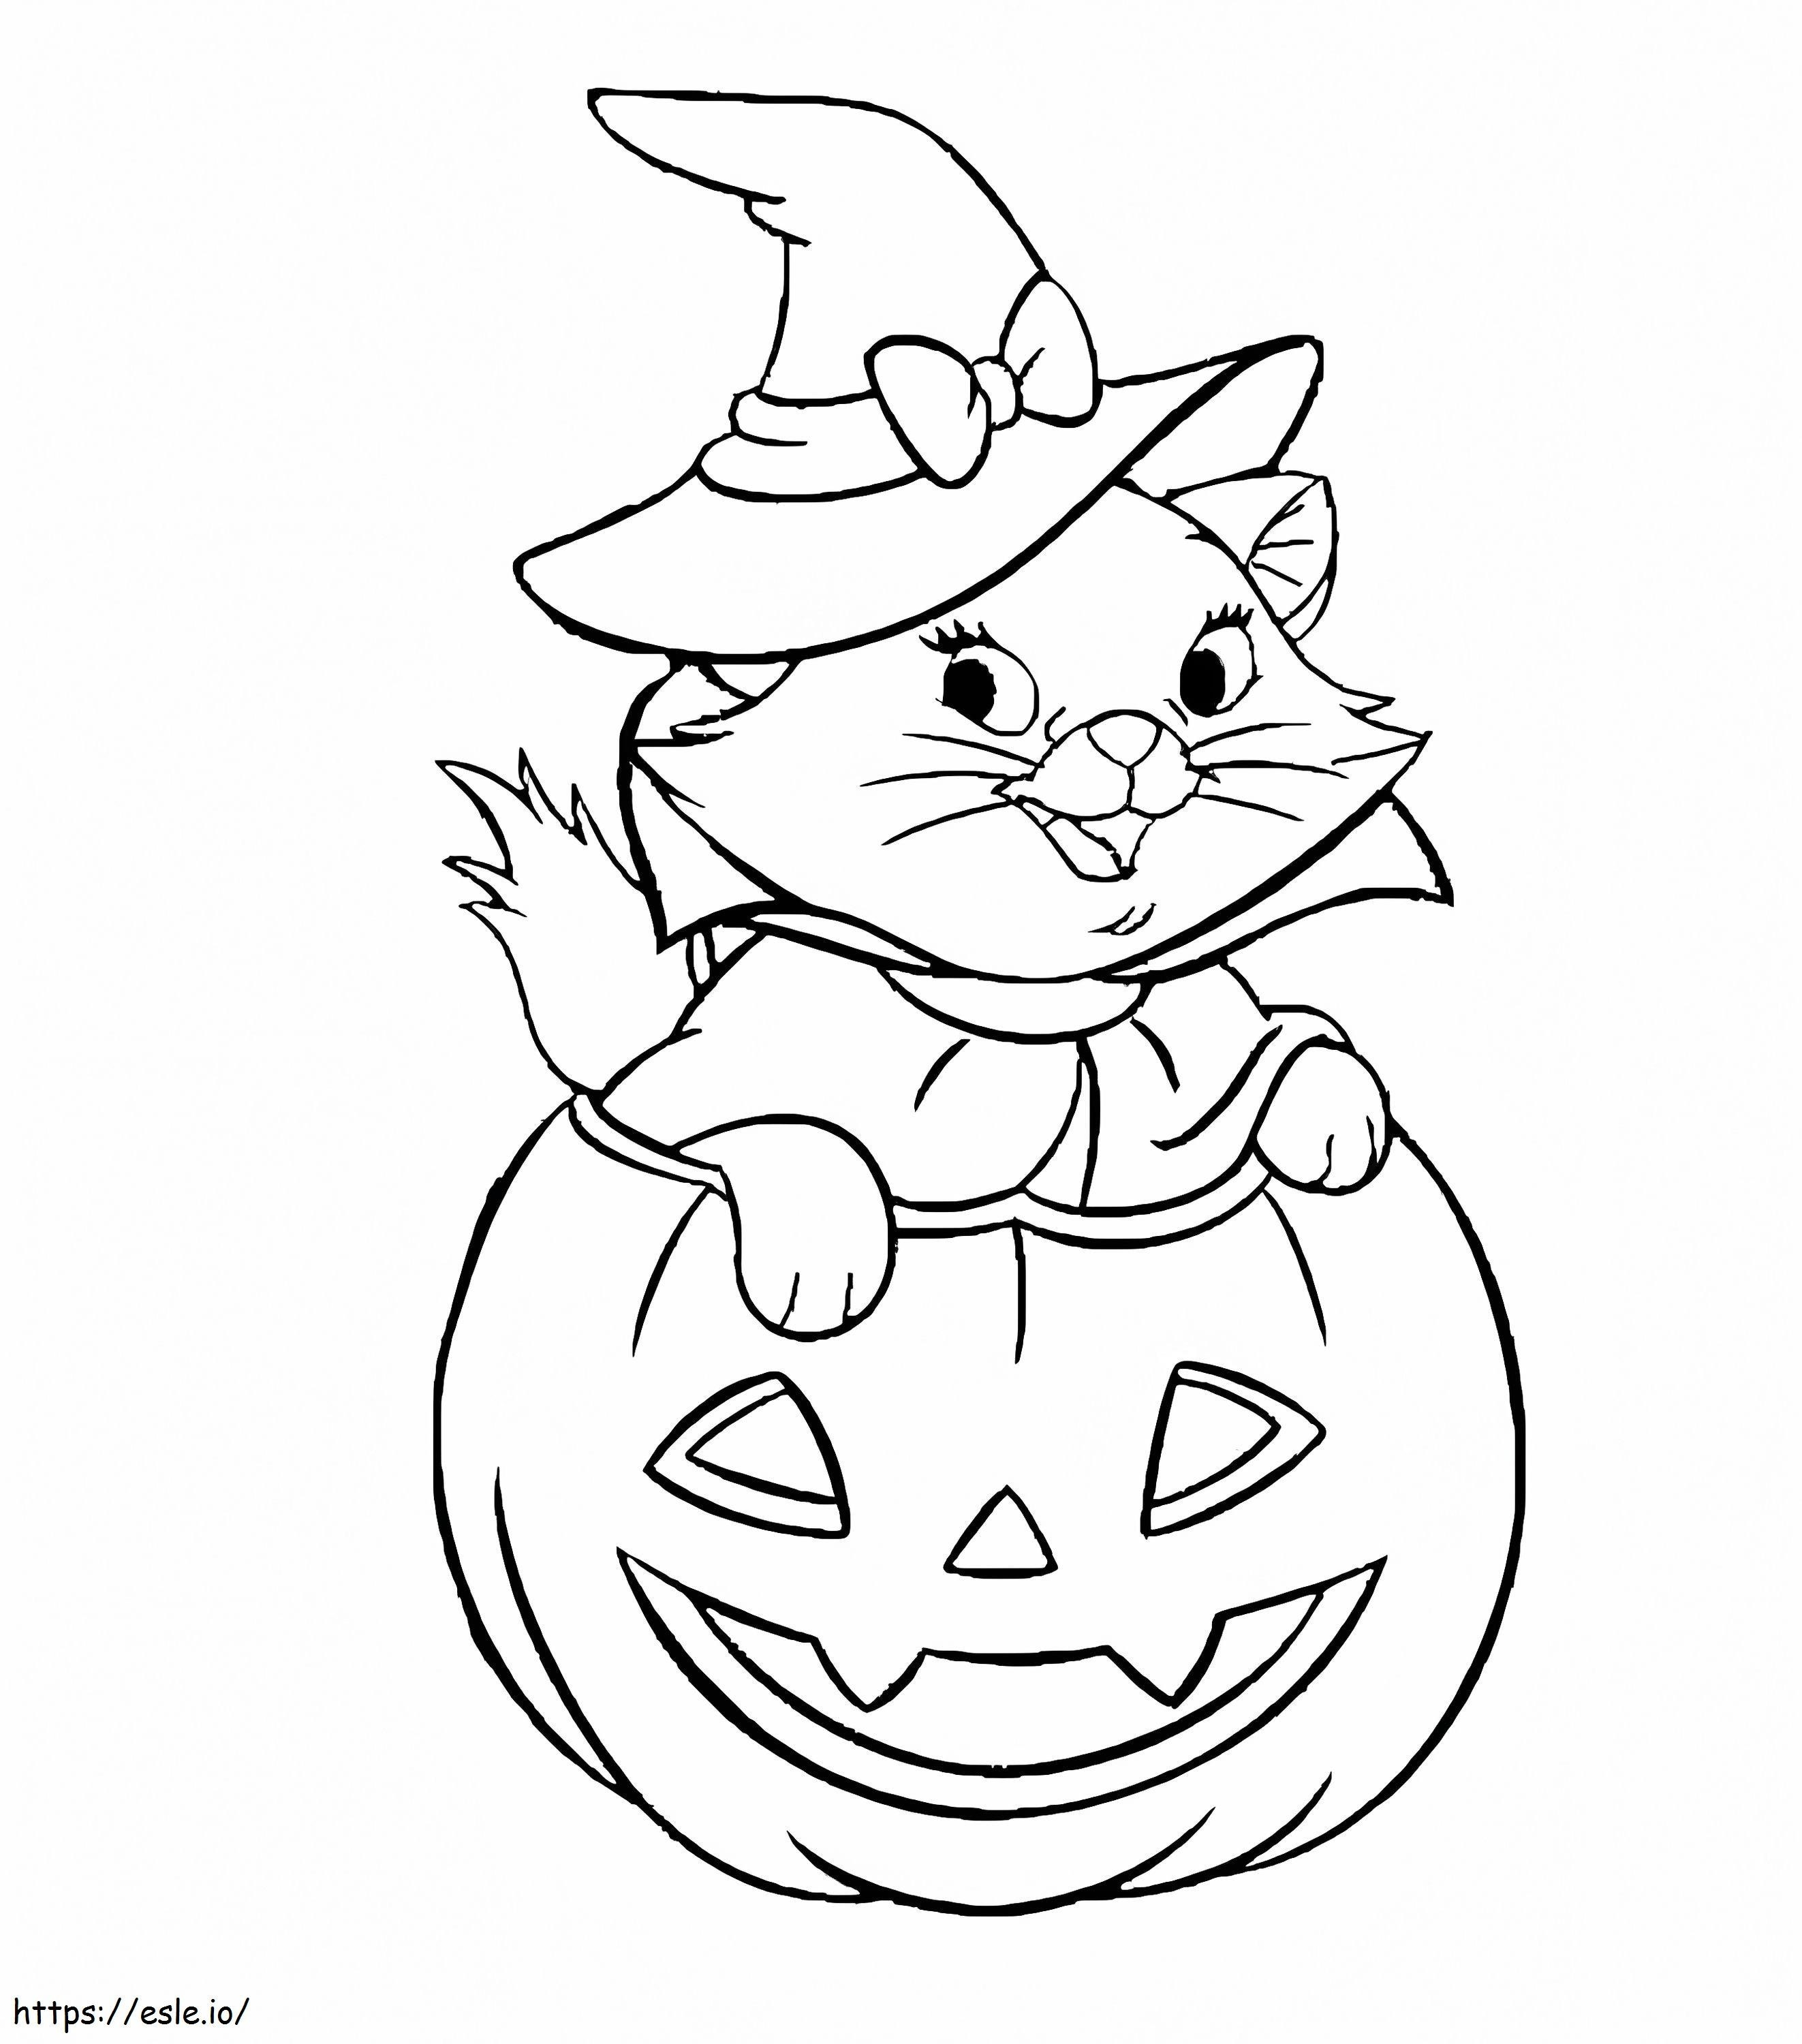 Marie Cat On Halloween coloring page